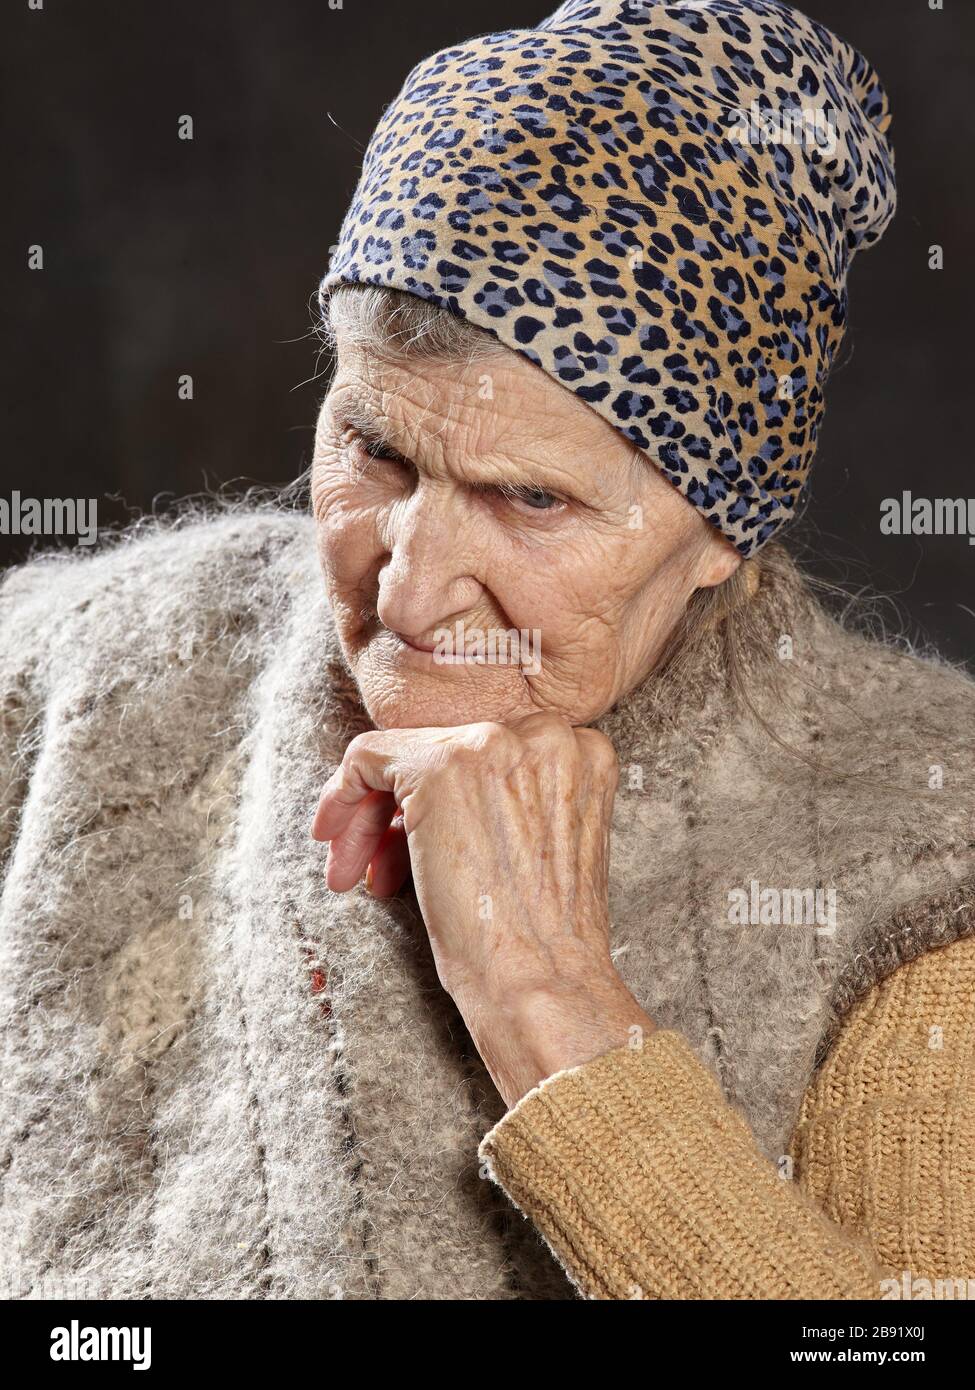 Close-up portrait of old woman with brooding look on dark background. She leaned her chin on her hand and deeply thought. Stock Photo